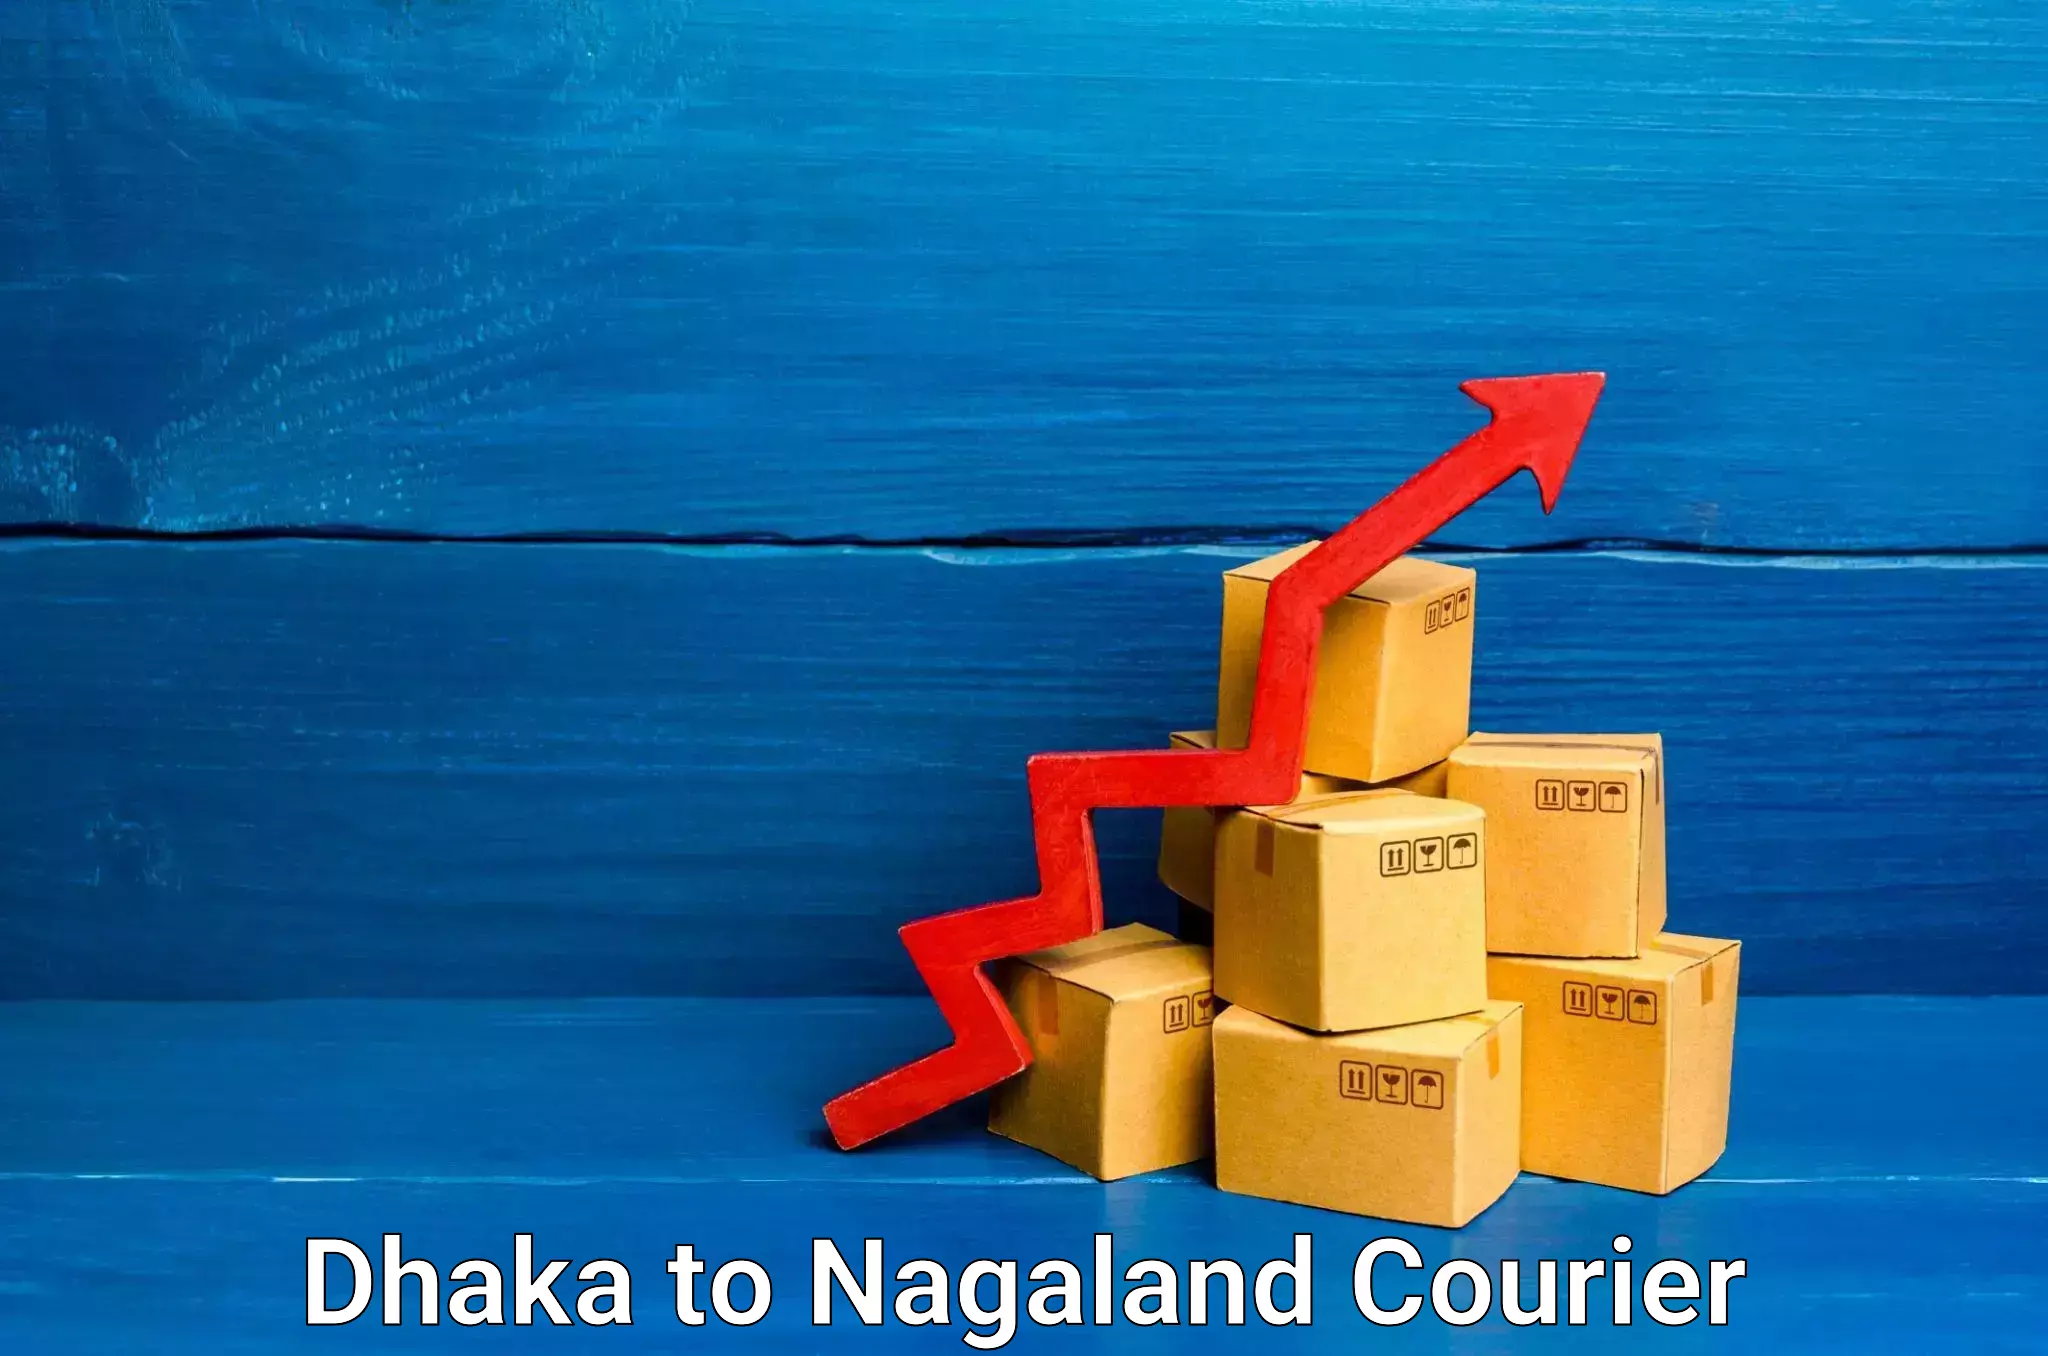 Furniture relocation experts Dhaka to Nagaland